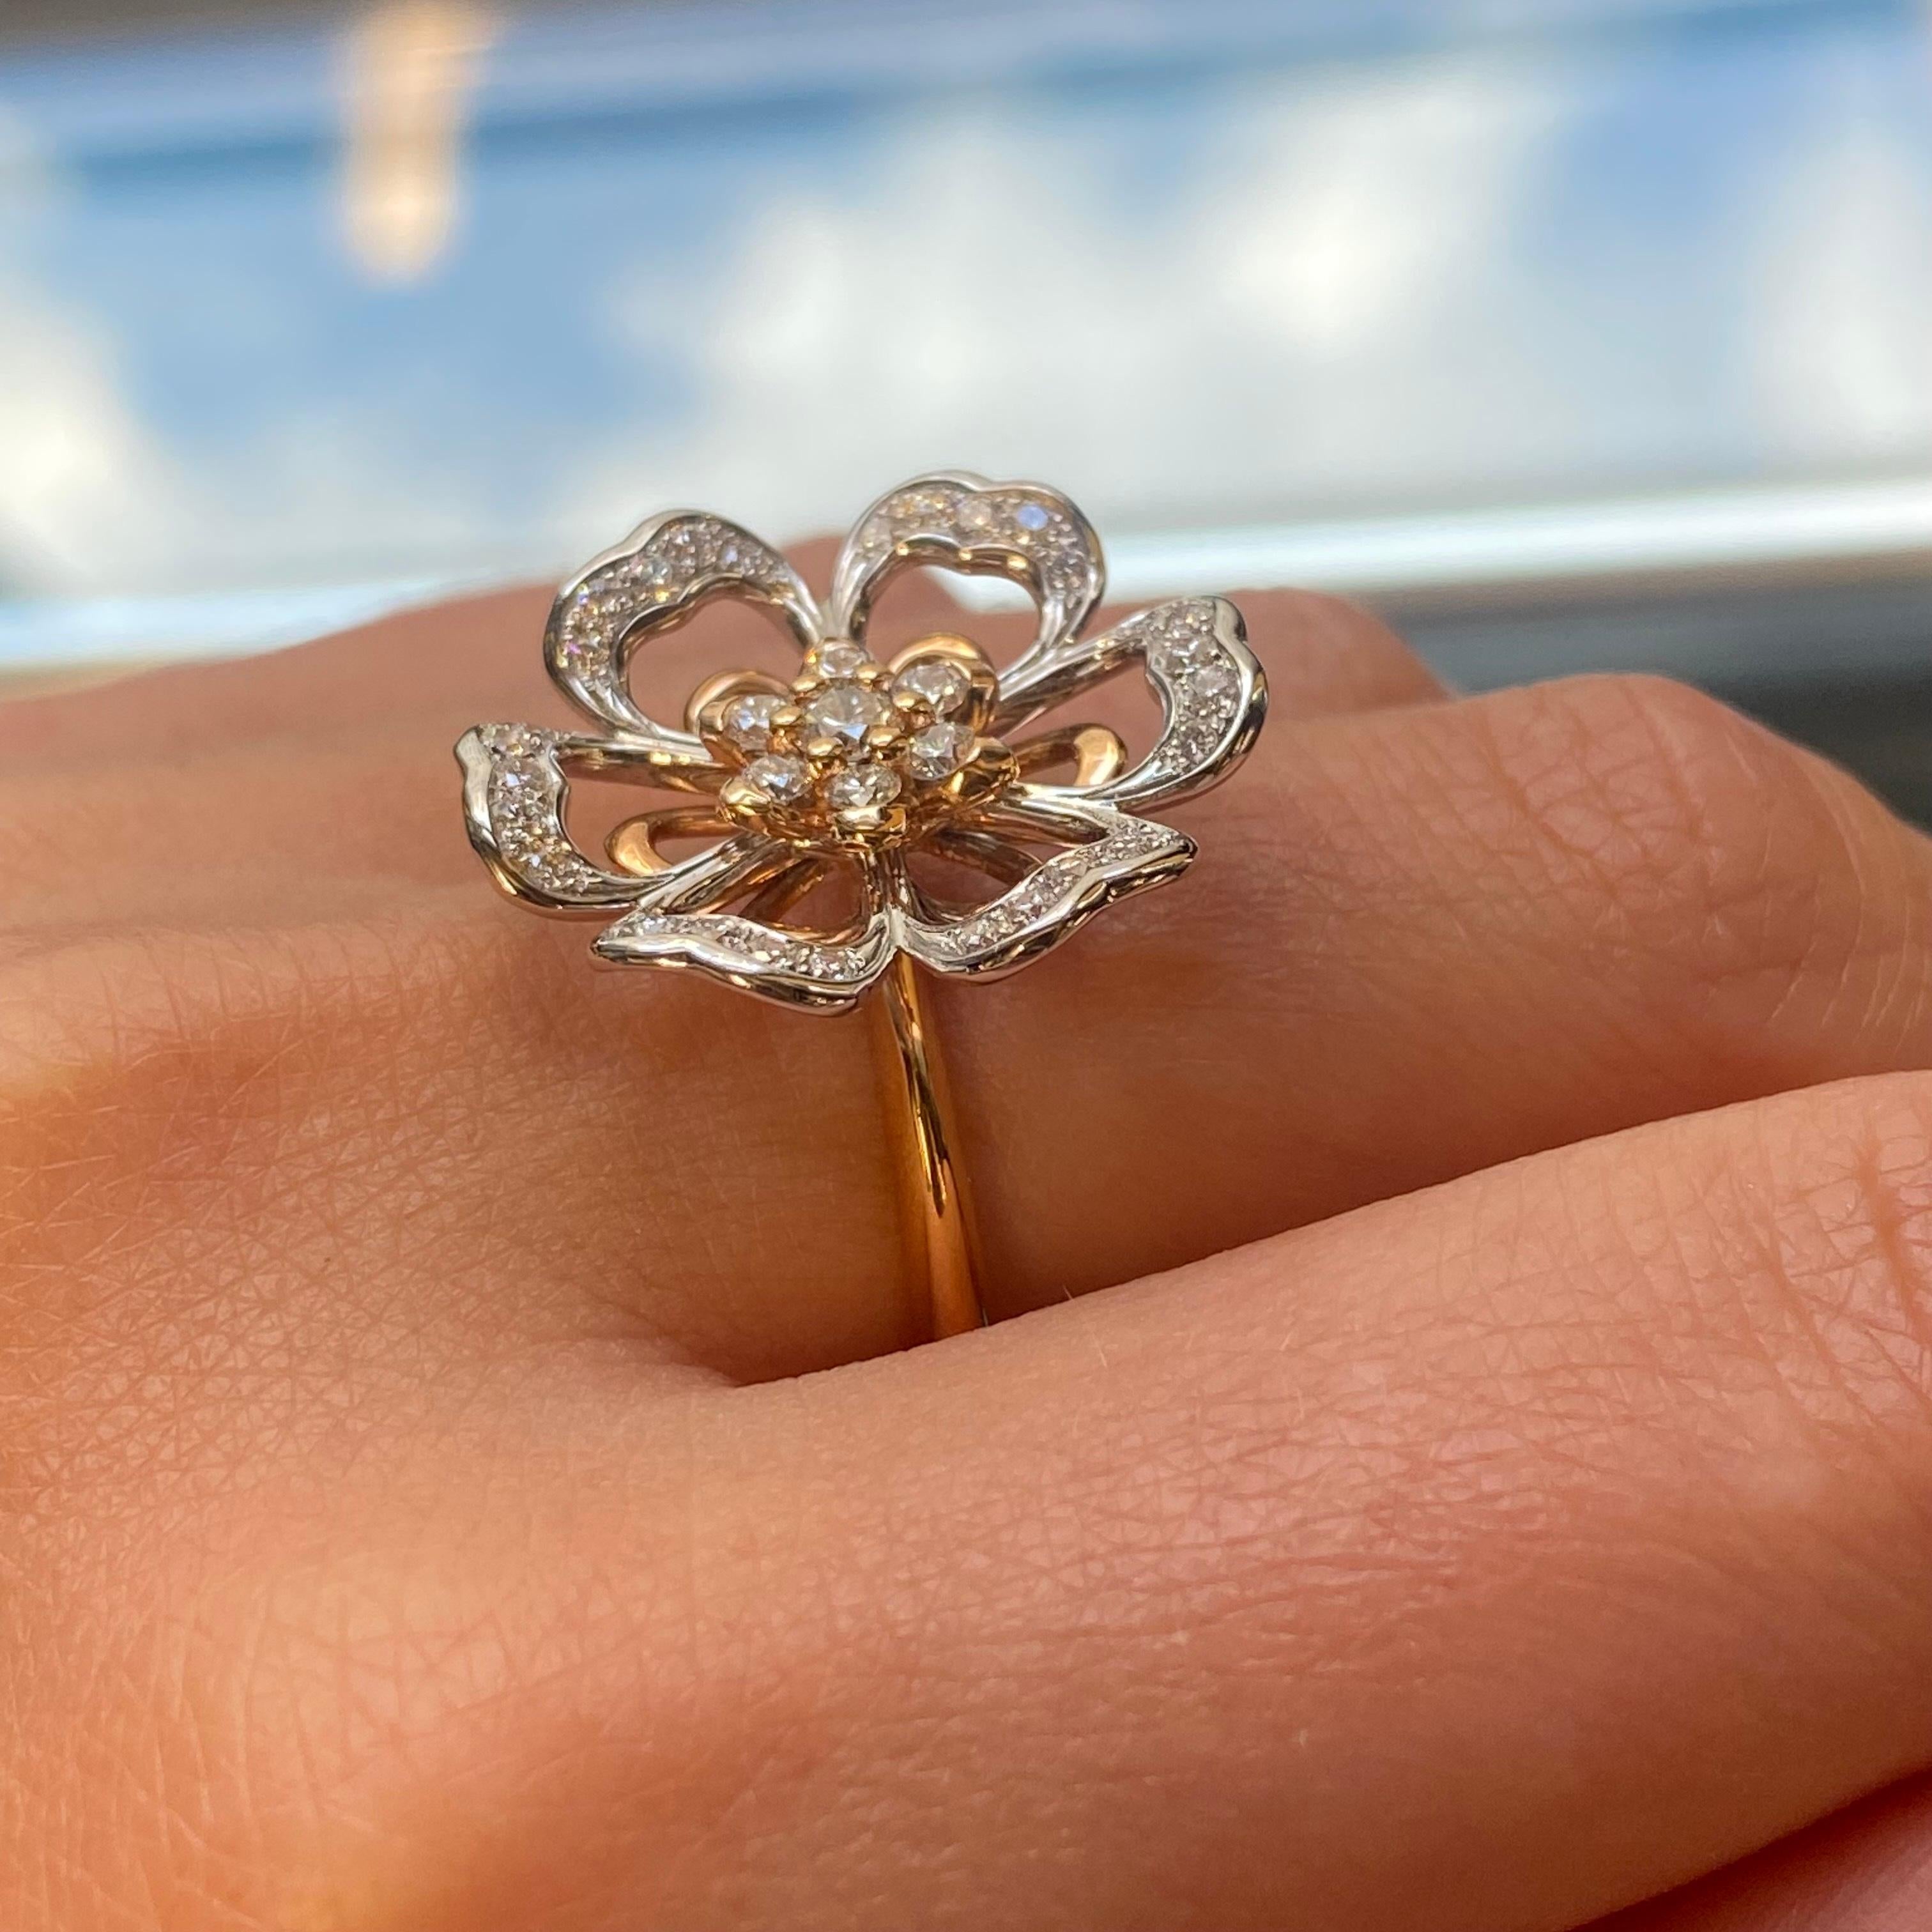 Luca Carati Diamond Cocktail Ring 18K White & Rose Gold 0.69Cttw Size 7.5 In New Condition For Sale In New York, NY